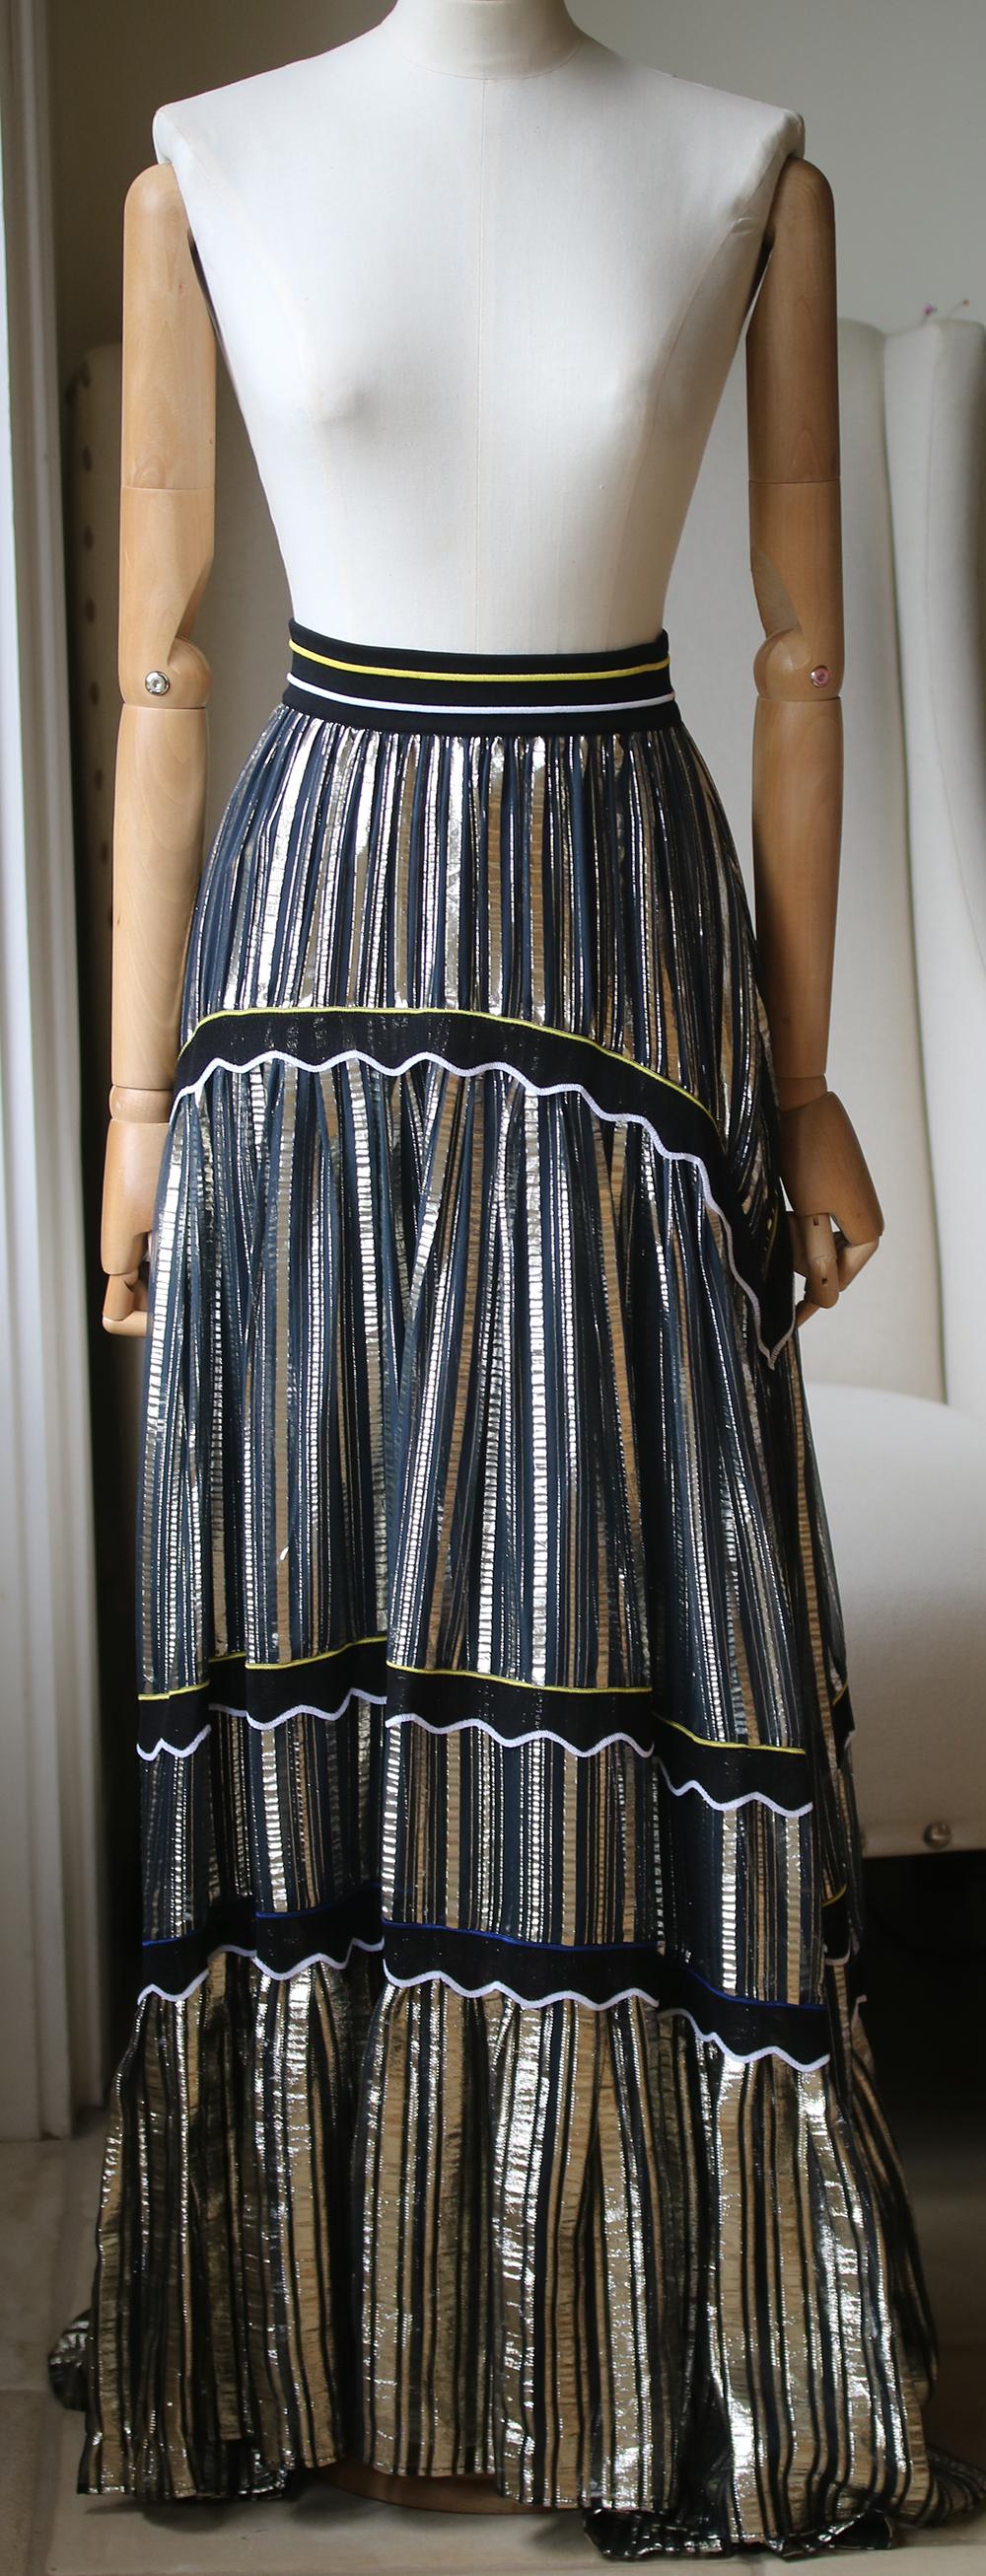 Cut from silk-blend chiffon woven with light-catching gold stripes, this maxi skirt is tiered with scalloped trims and has a ribbed elasticated waistband for a sporty feel. Black and gold silk-blend chiffon, black stretch-knit. Pulls on. 62% silk,